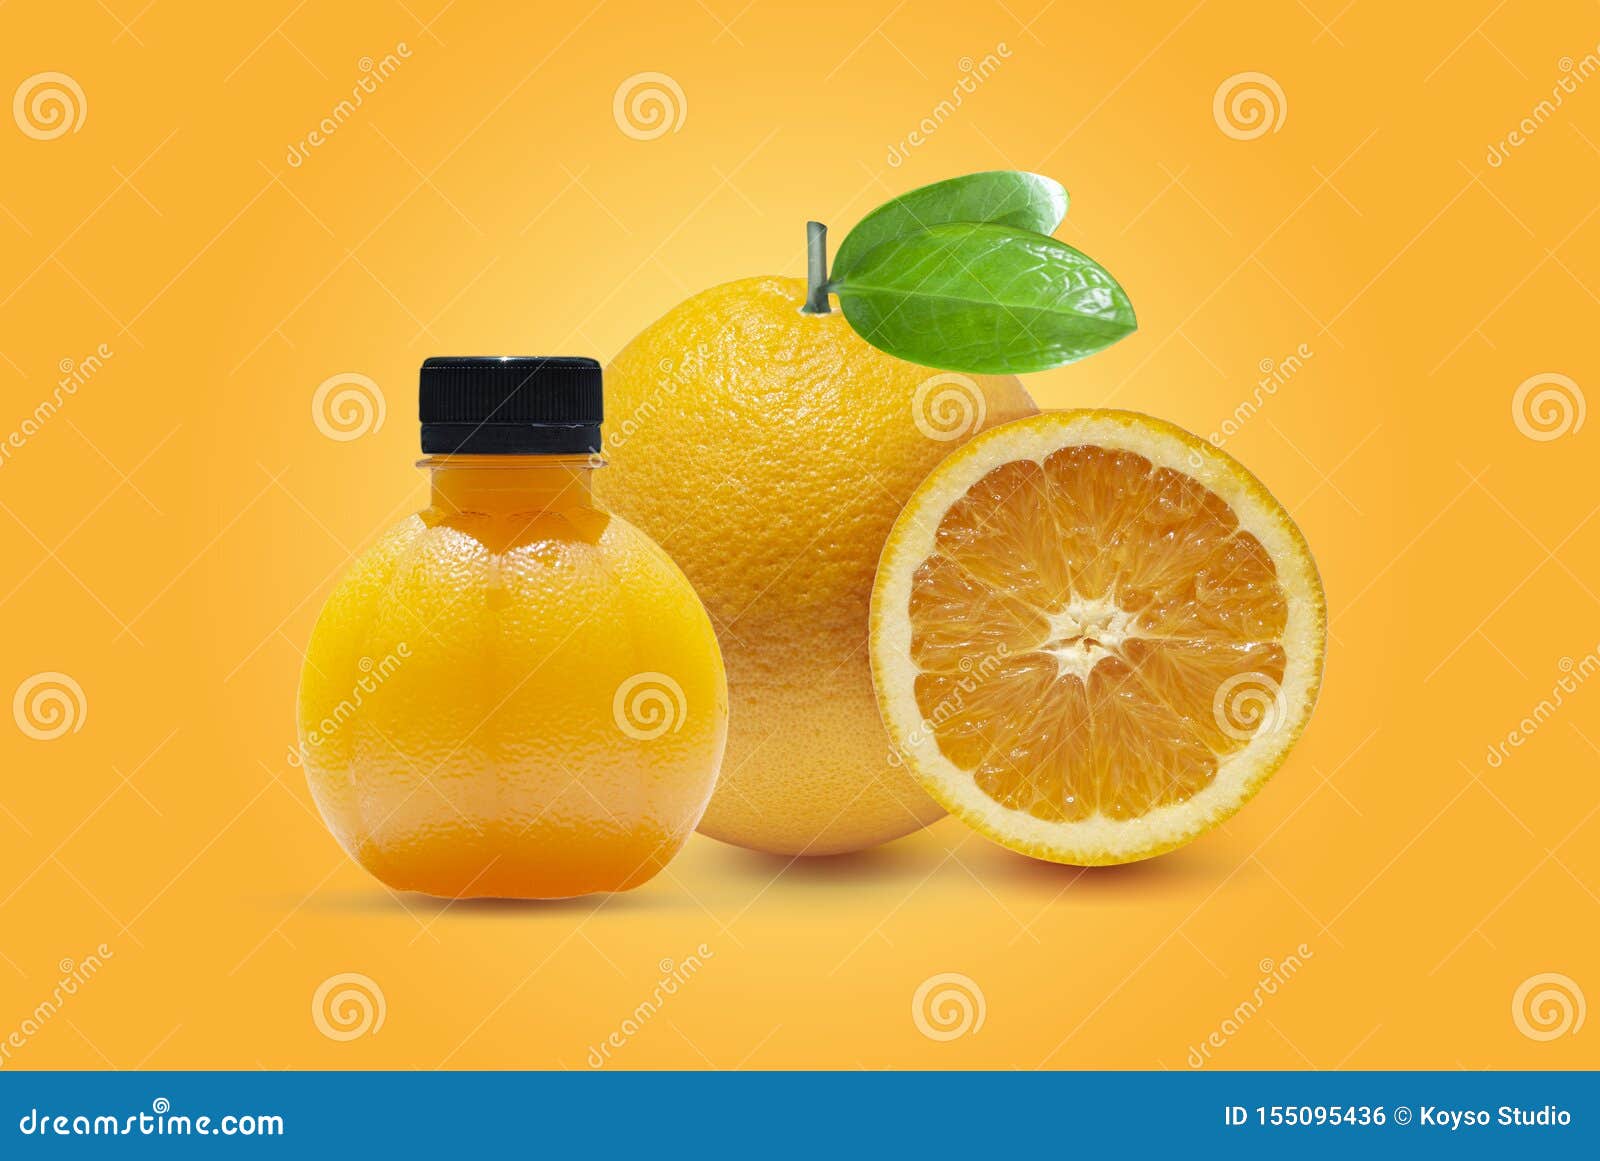 fresh orange  on orange background.juicy and sweet and renowned for its concentration of vitamin c